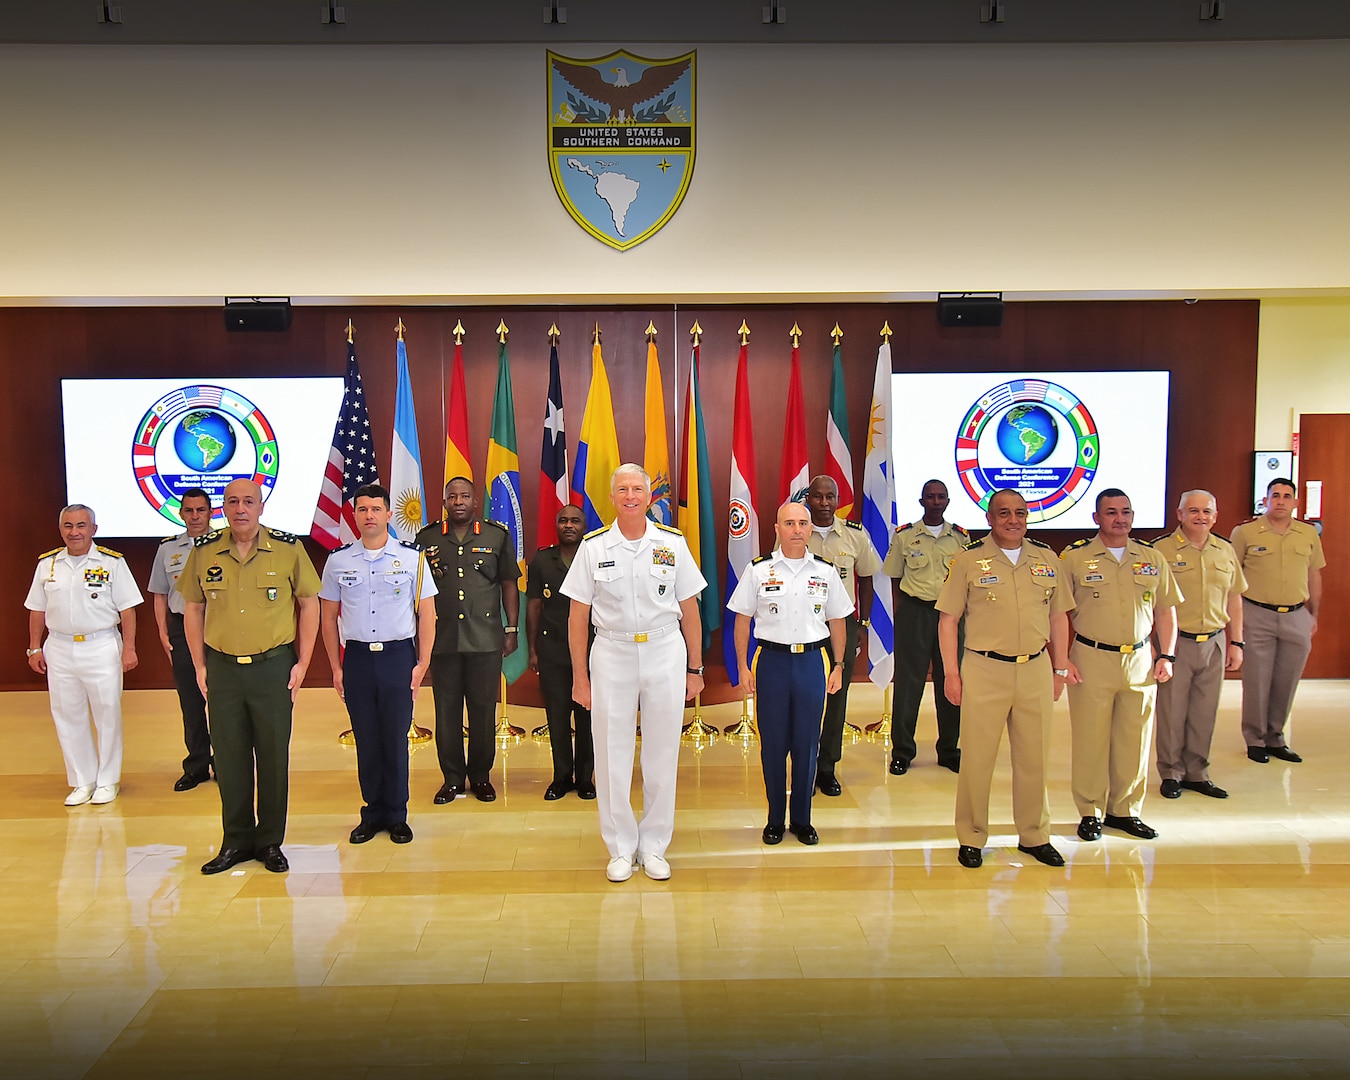 Multinational participants of the South American Defense Conference (SOUTHDEC) pose for a group photo at the U.S. Southern Command headquarters.